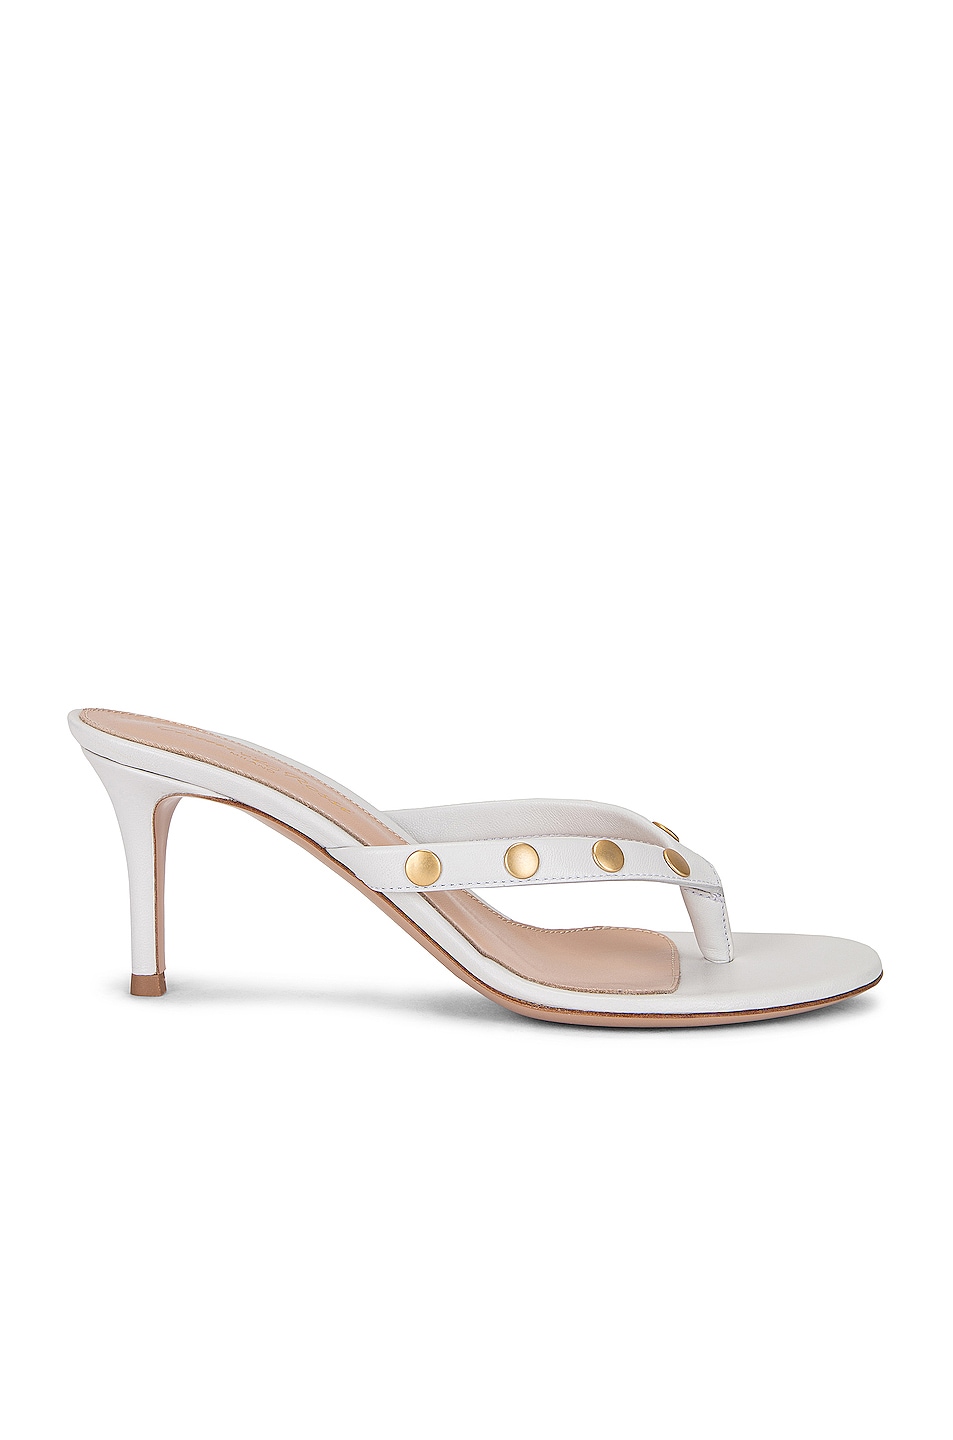 Gianvito Rossi Stud Thong Sandals in White | FWRD